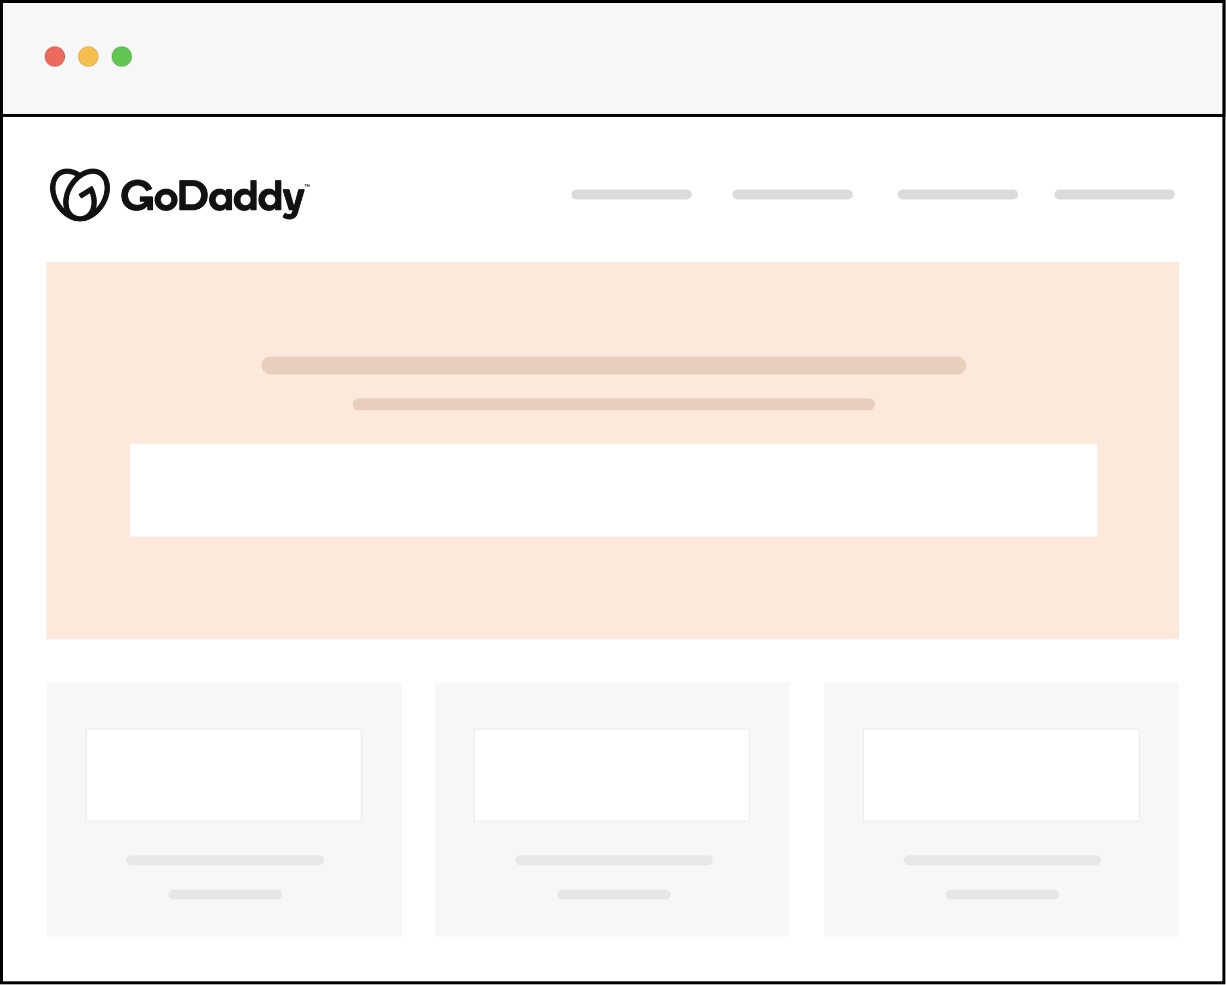 Live chat software for GoDaddy sites